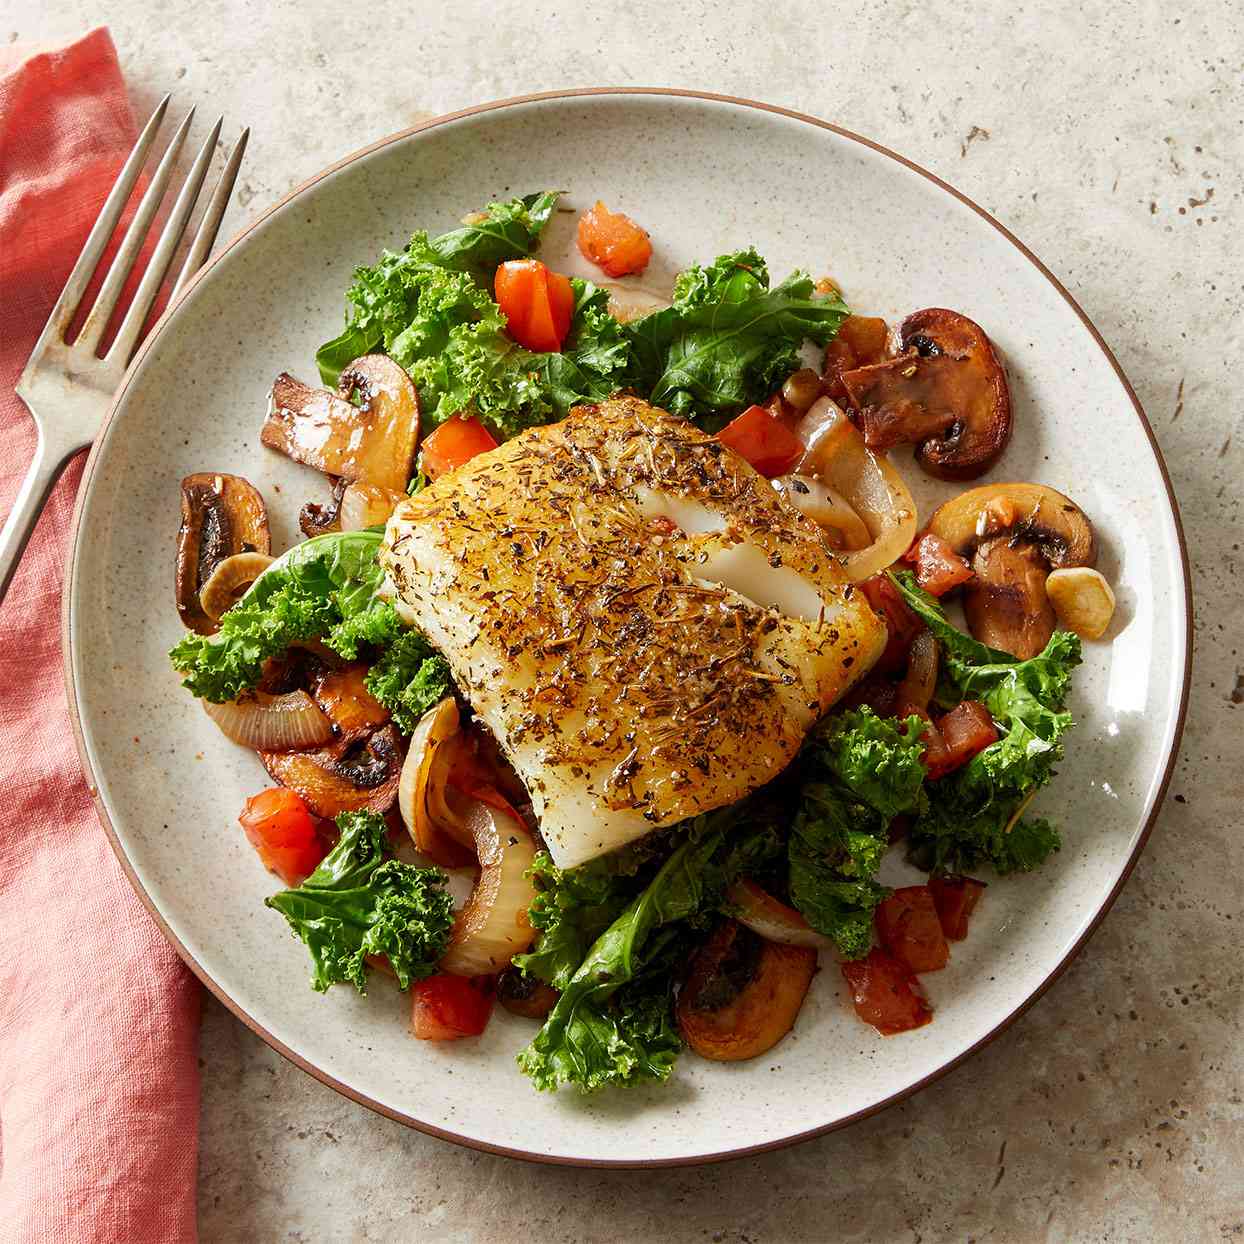 Herby Mediterranean Fish with Wilted Greens & Mushrooms